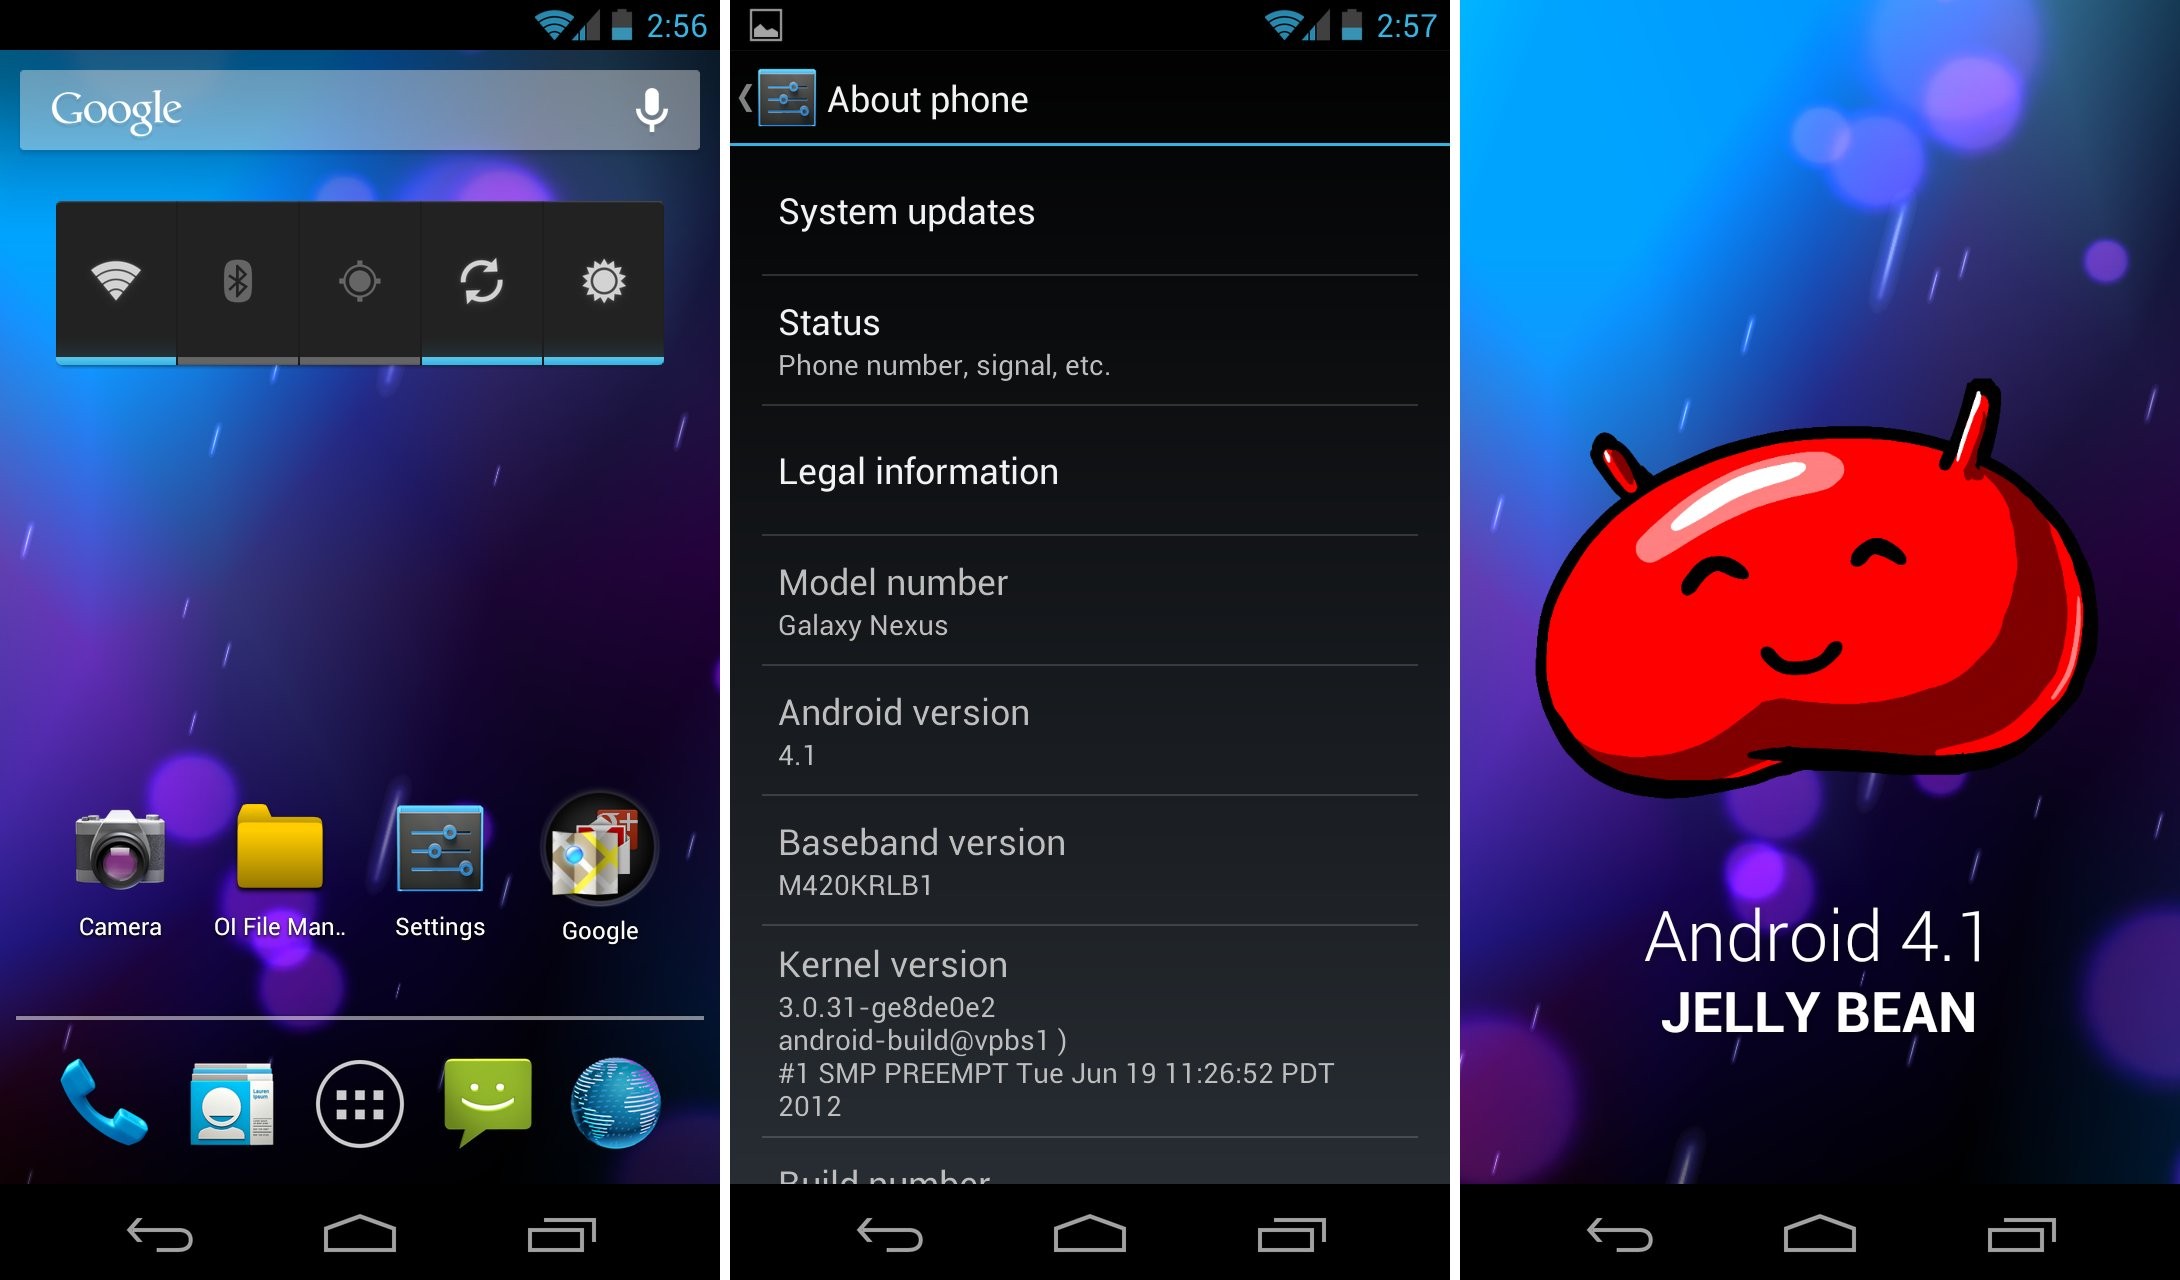 android 4.0 jelly bean software free download